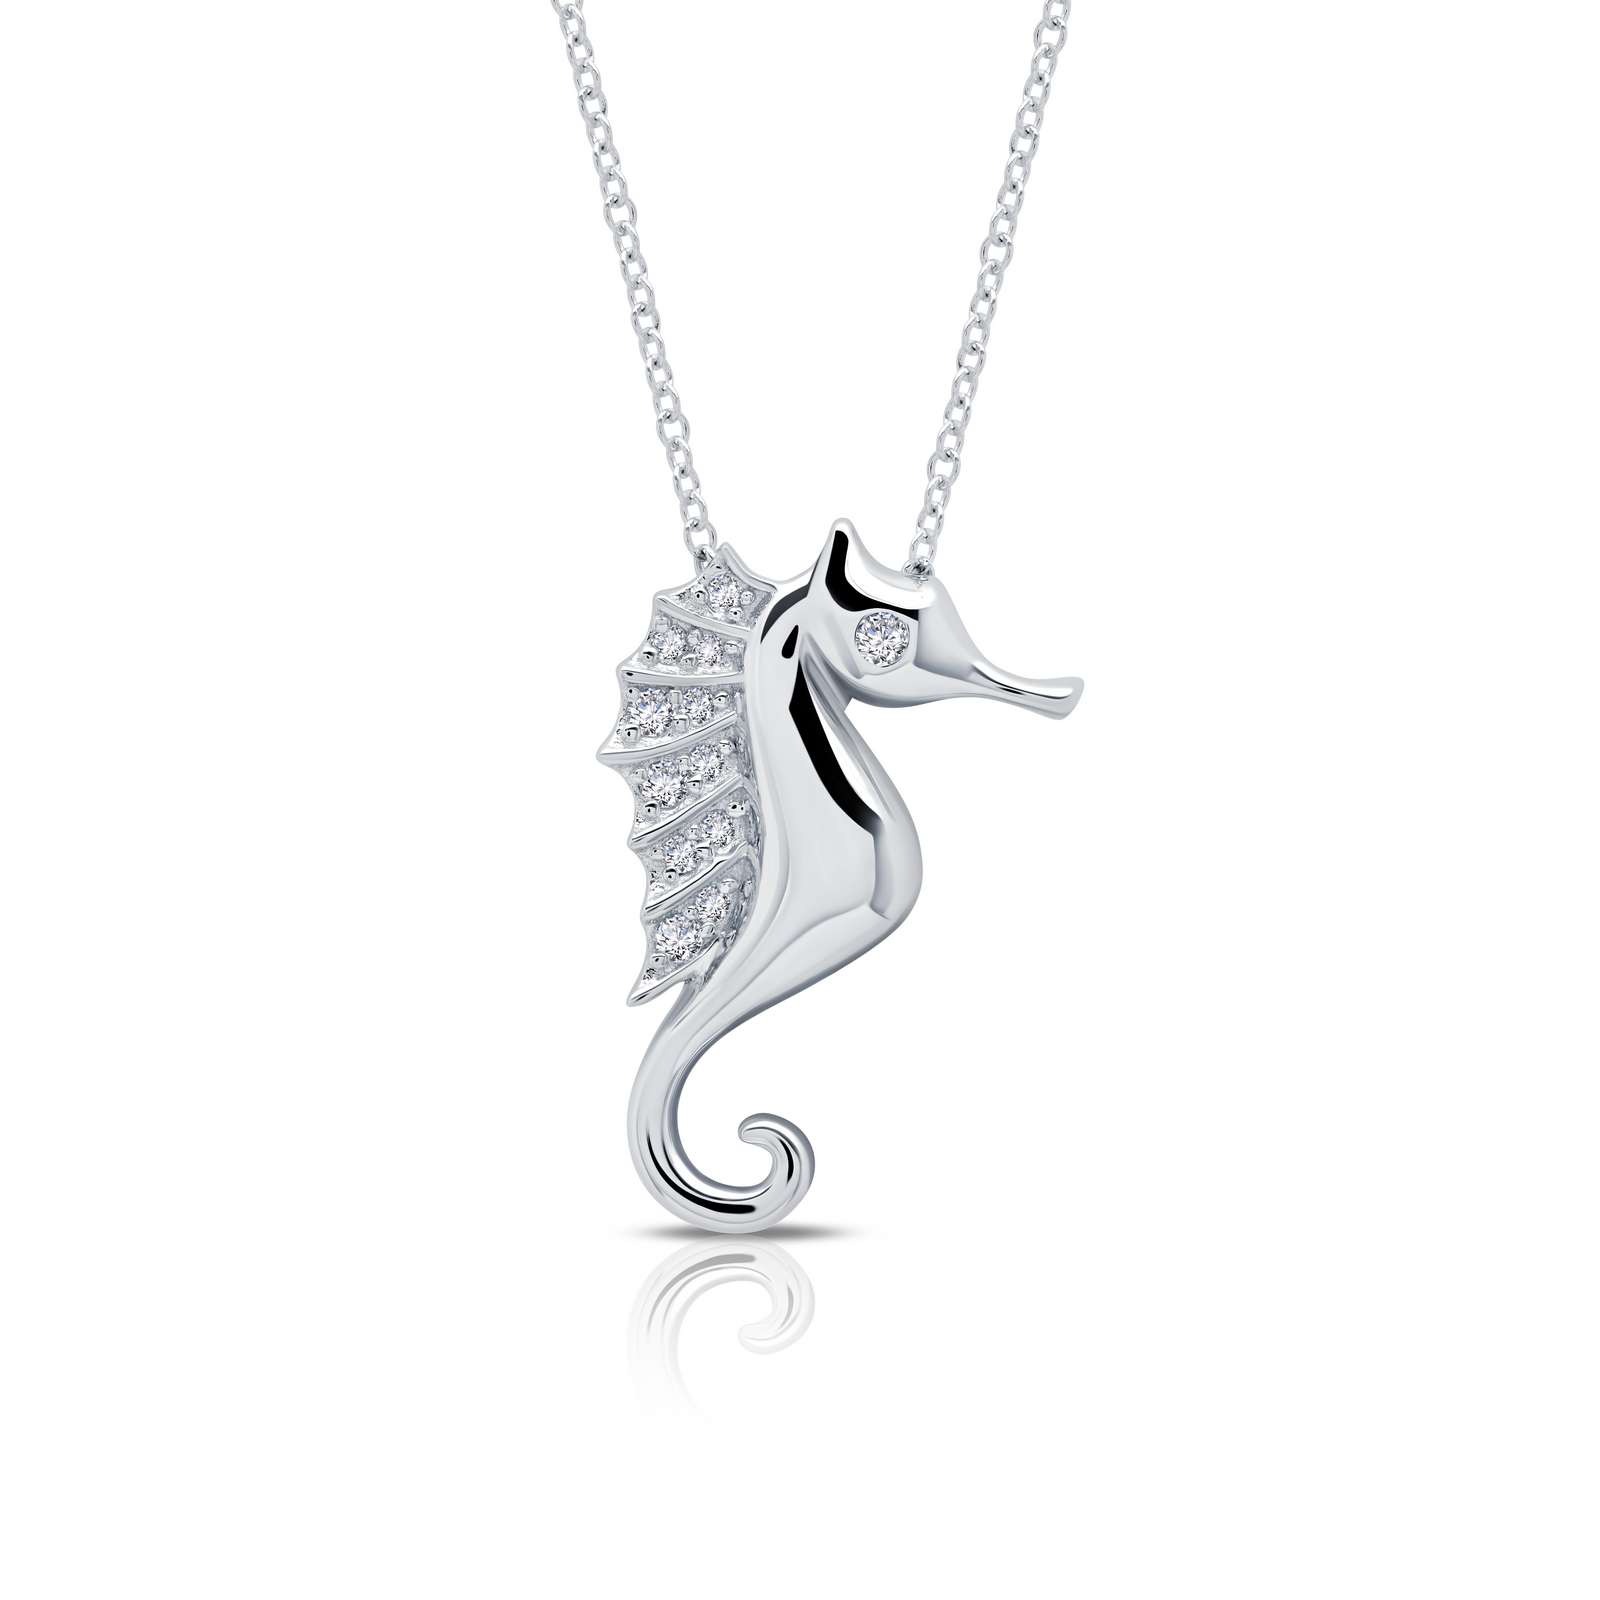 Whimsical Seahorse Necklace Griner Jewelry Co. Moultrie, GA